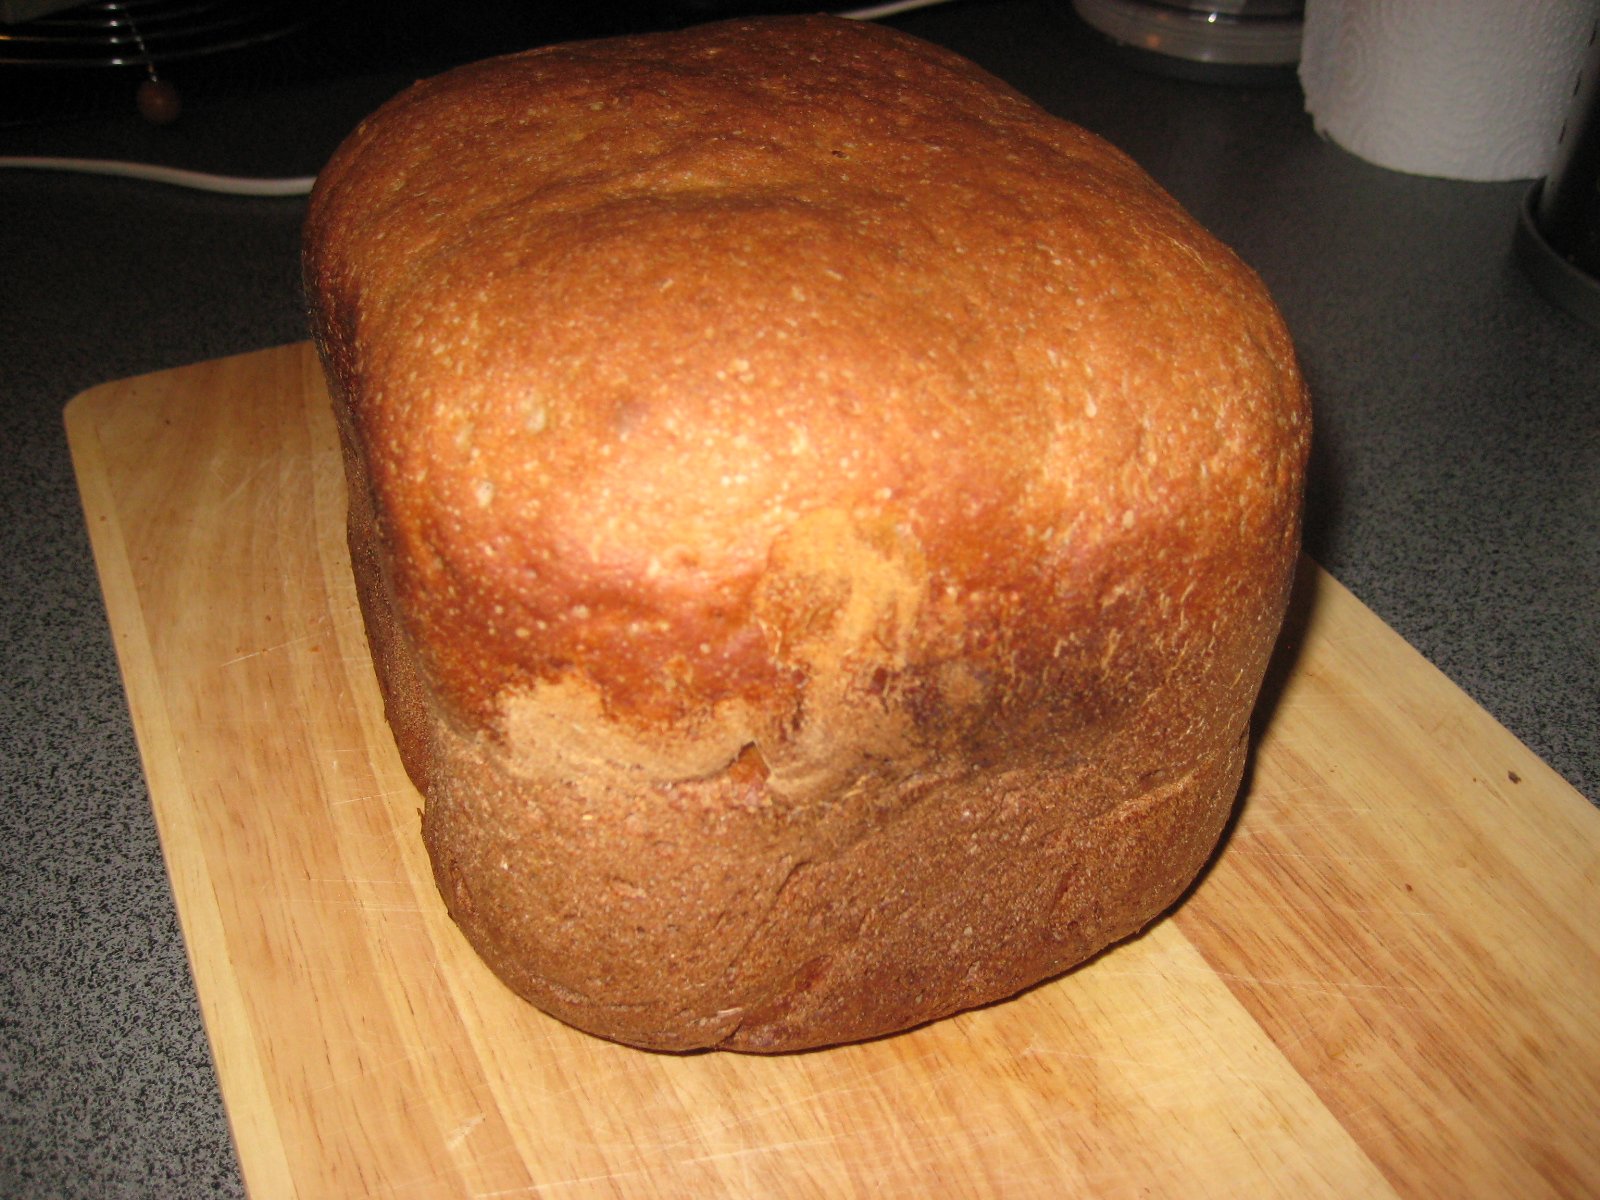 Rye-wheat bread with sourdough and beer in a bread maker